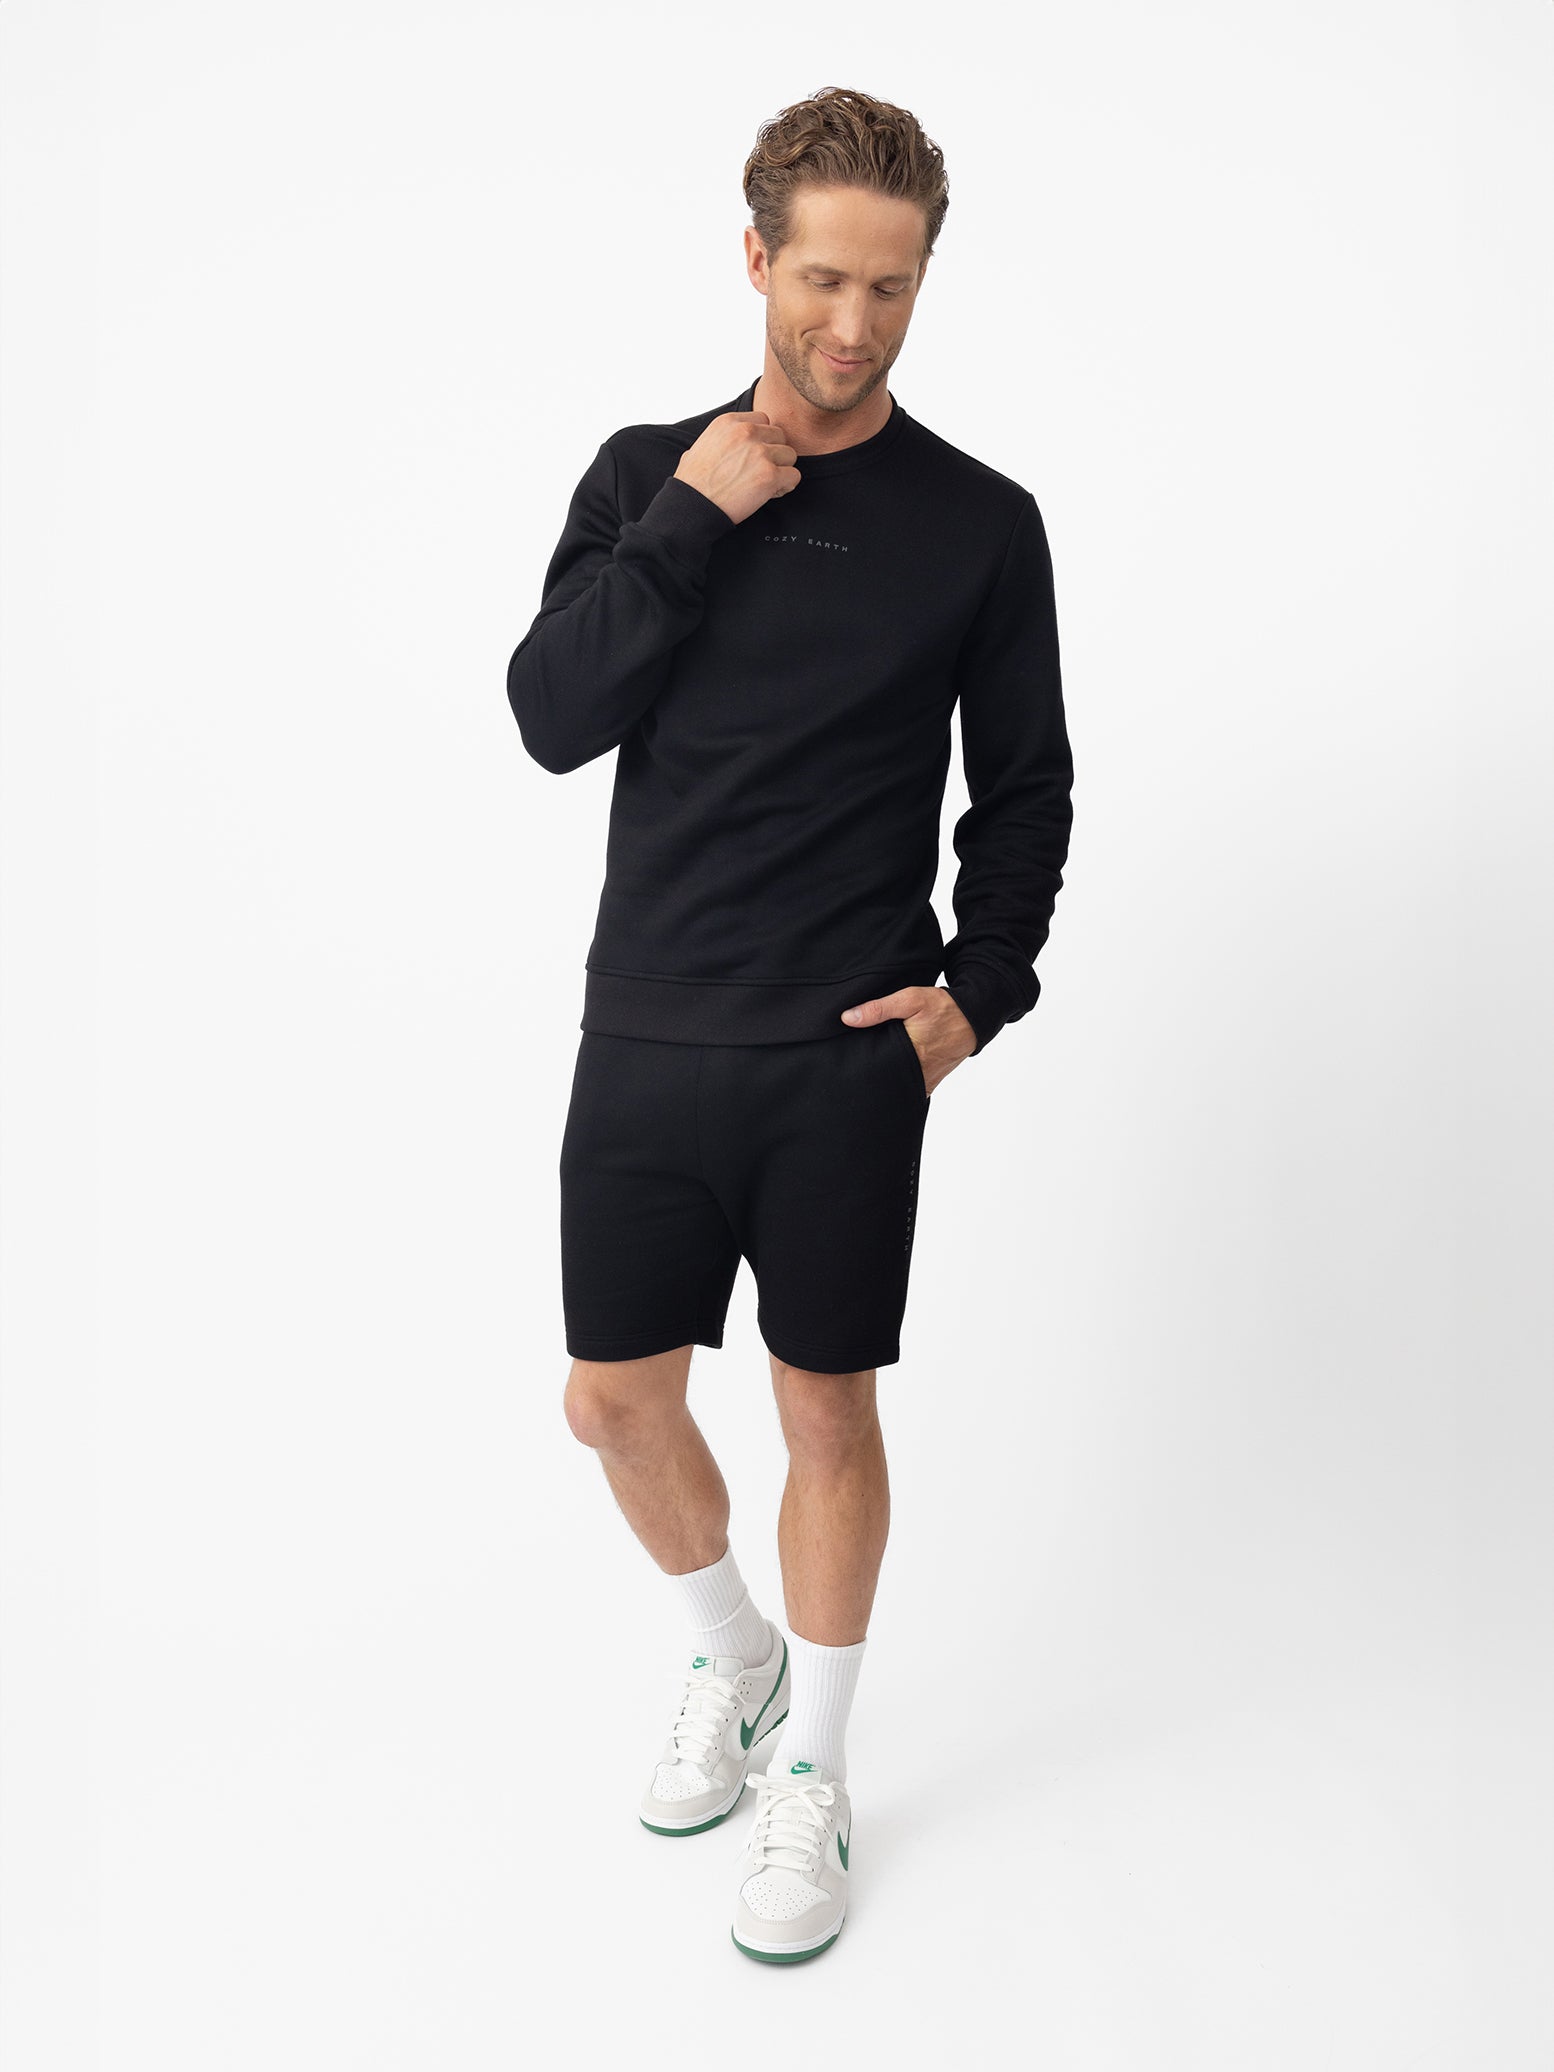 Man wearing black cityscape pullover and shorts with white background 